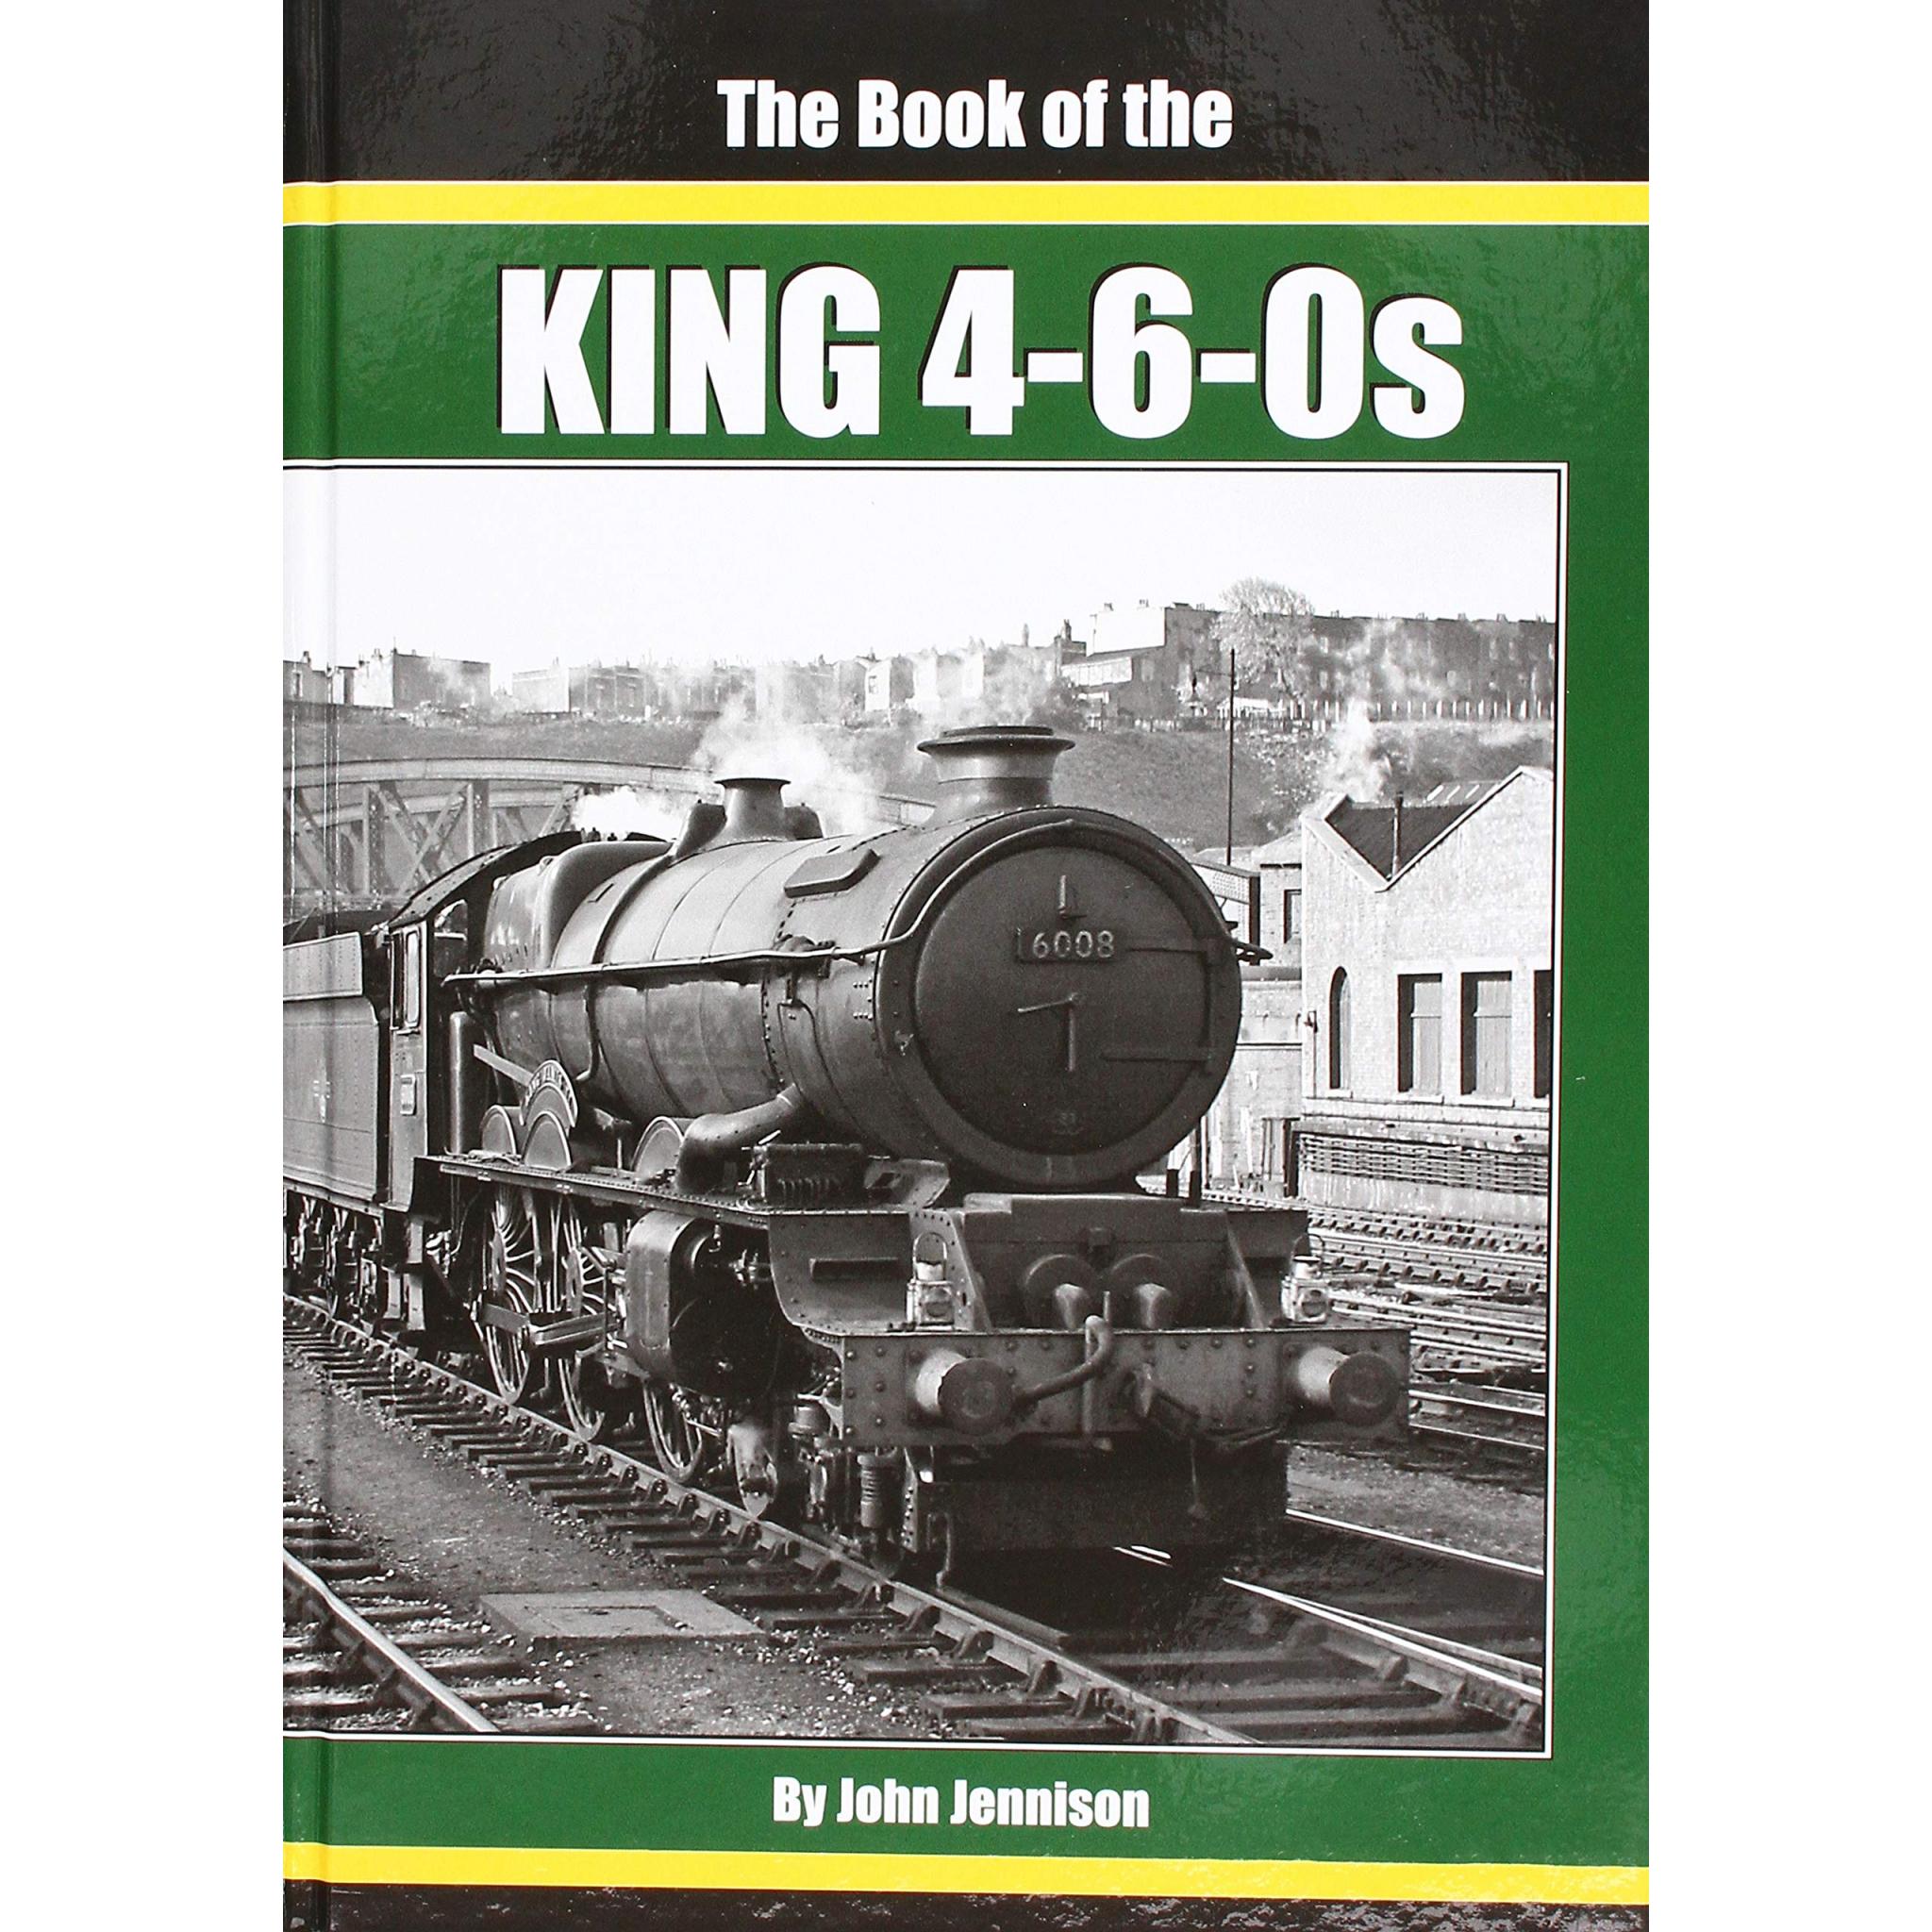 The Book of the KING 4-6-0s LAST FEW COPIES